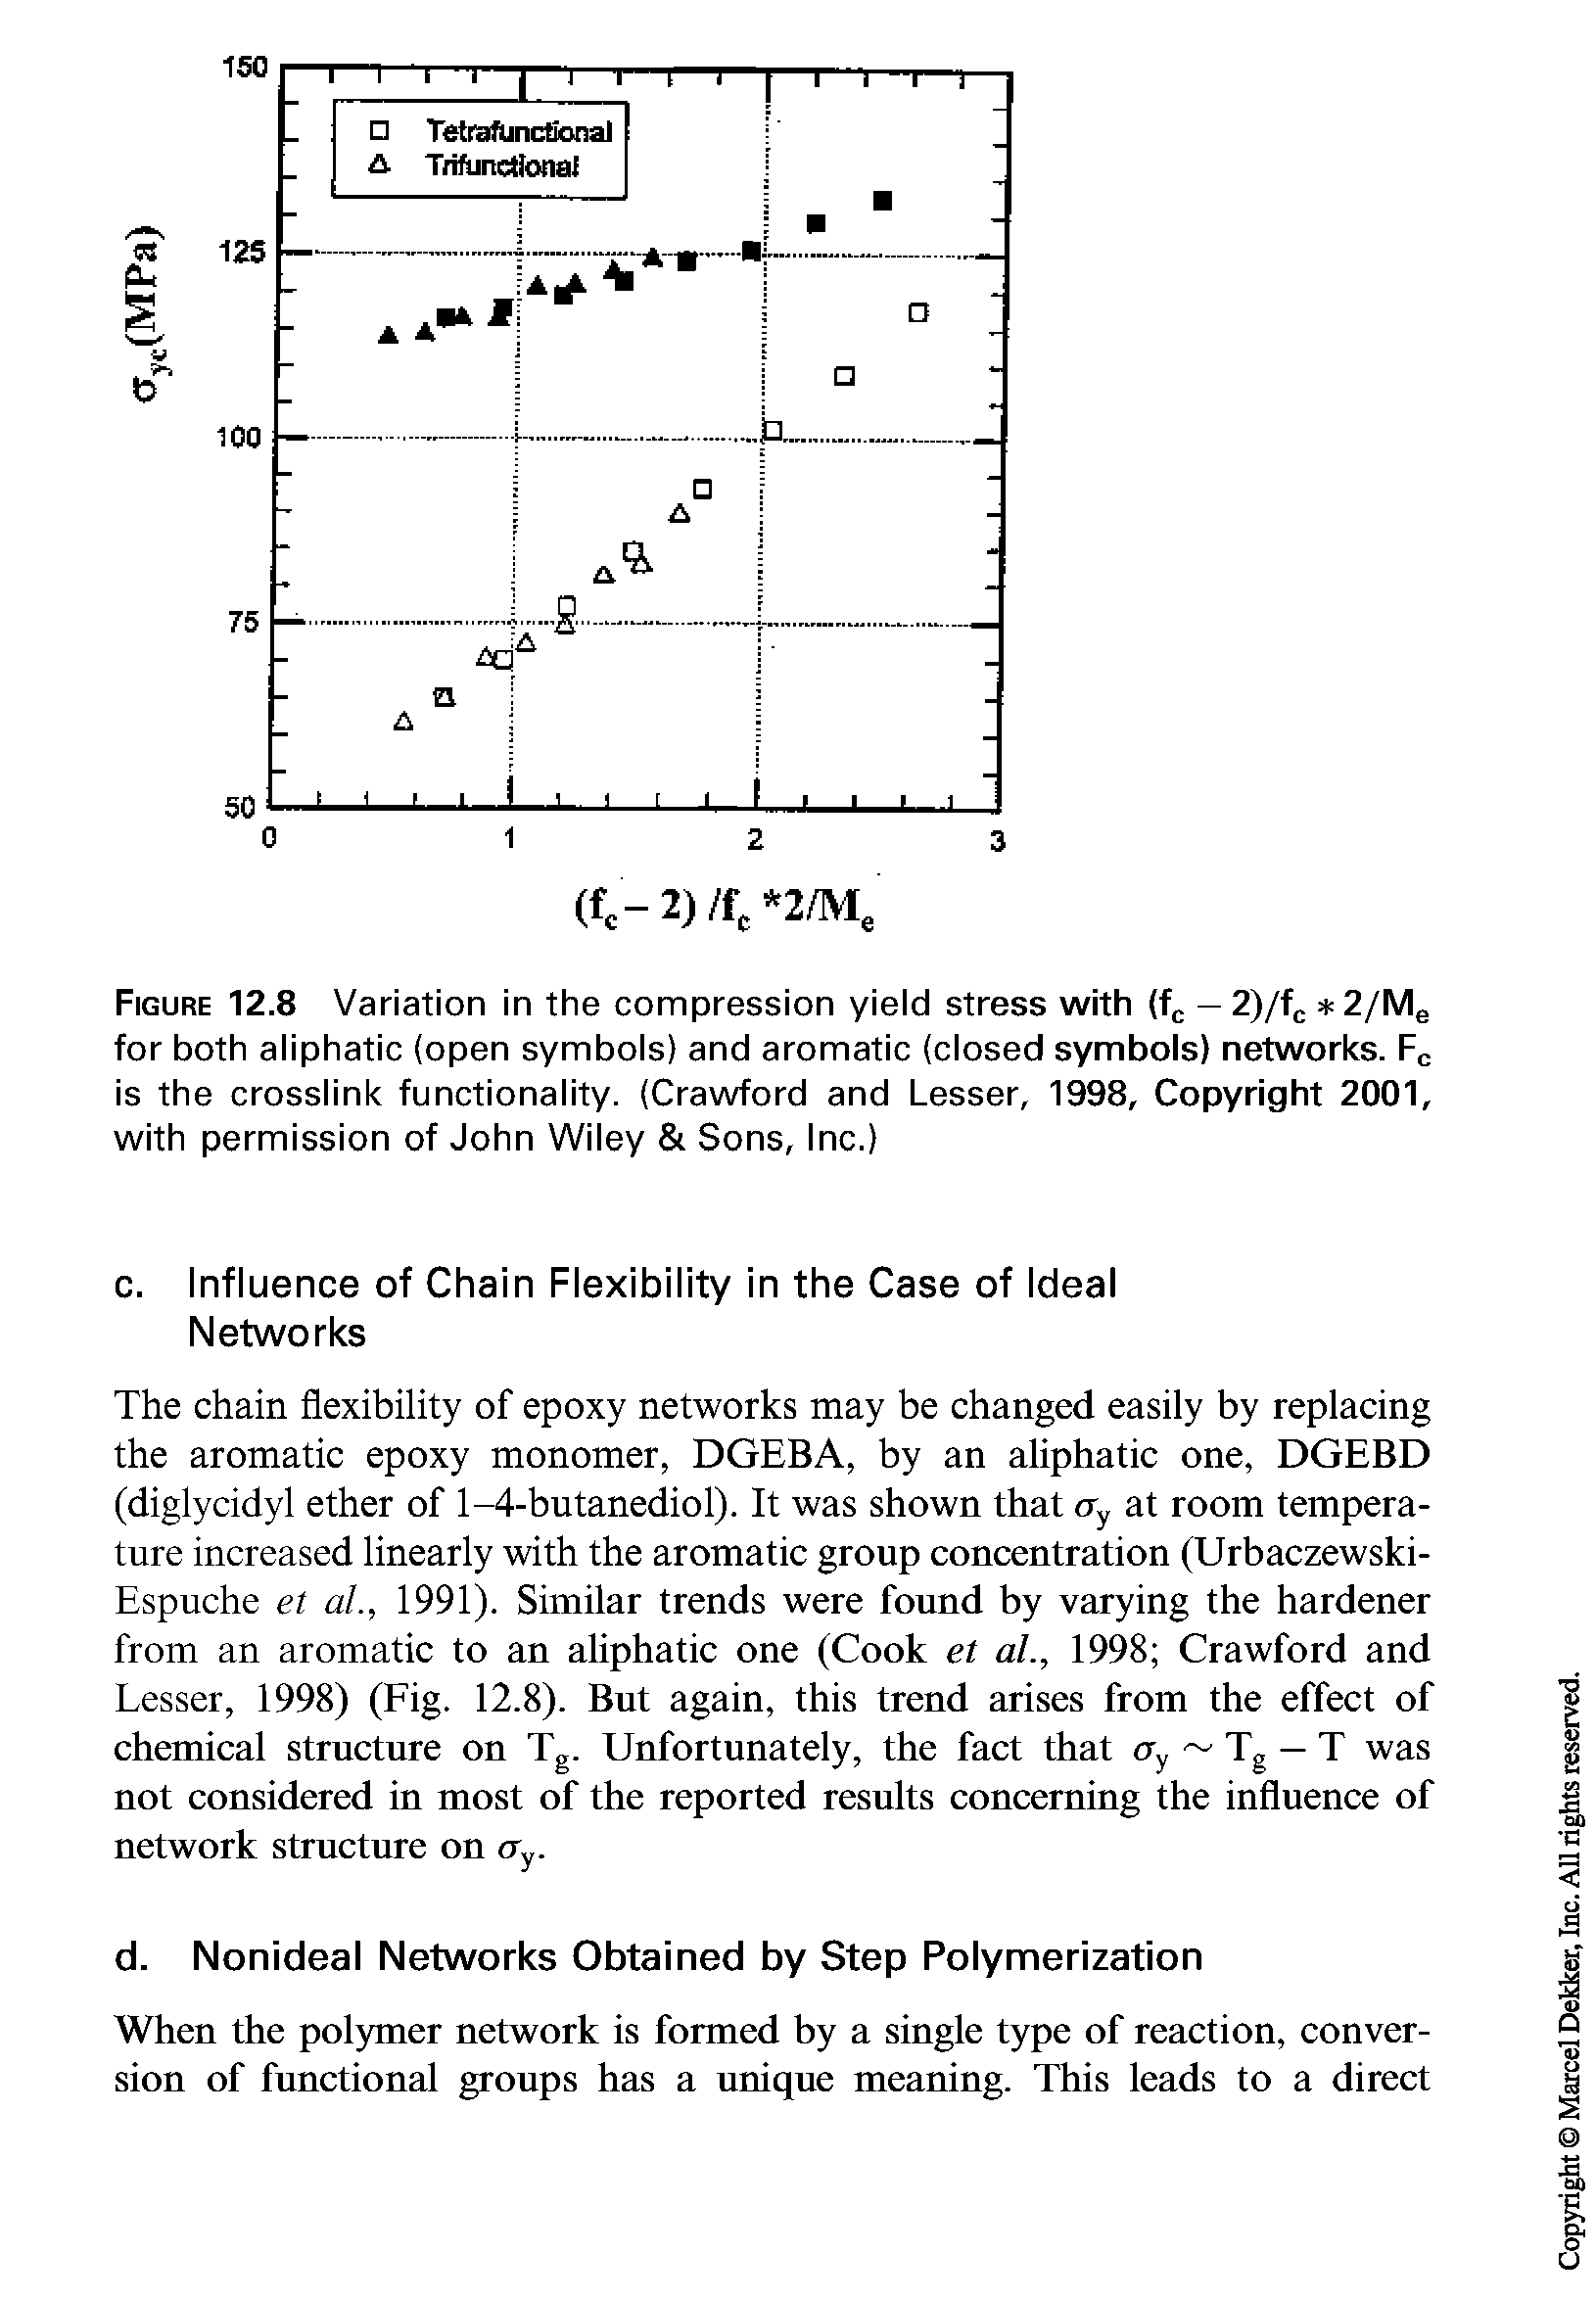 Figure 12.8 Variation in the compression yield stress with (fc — 2)/fc 2/Me for both aliphatic (open symbols) and aromatic (closed symbols) networks. Fc is the crosslink functionality. (Crawford and Lesser, 1998, Copyright 2001, with permission of John Wiley Sons, Inc.)...